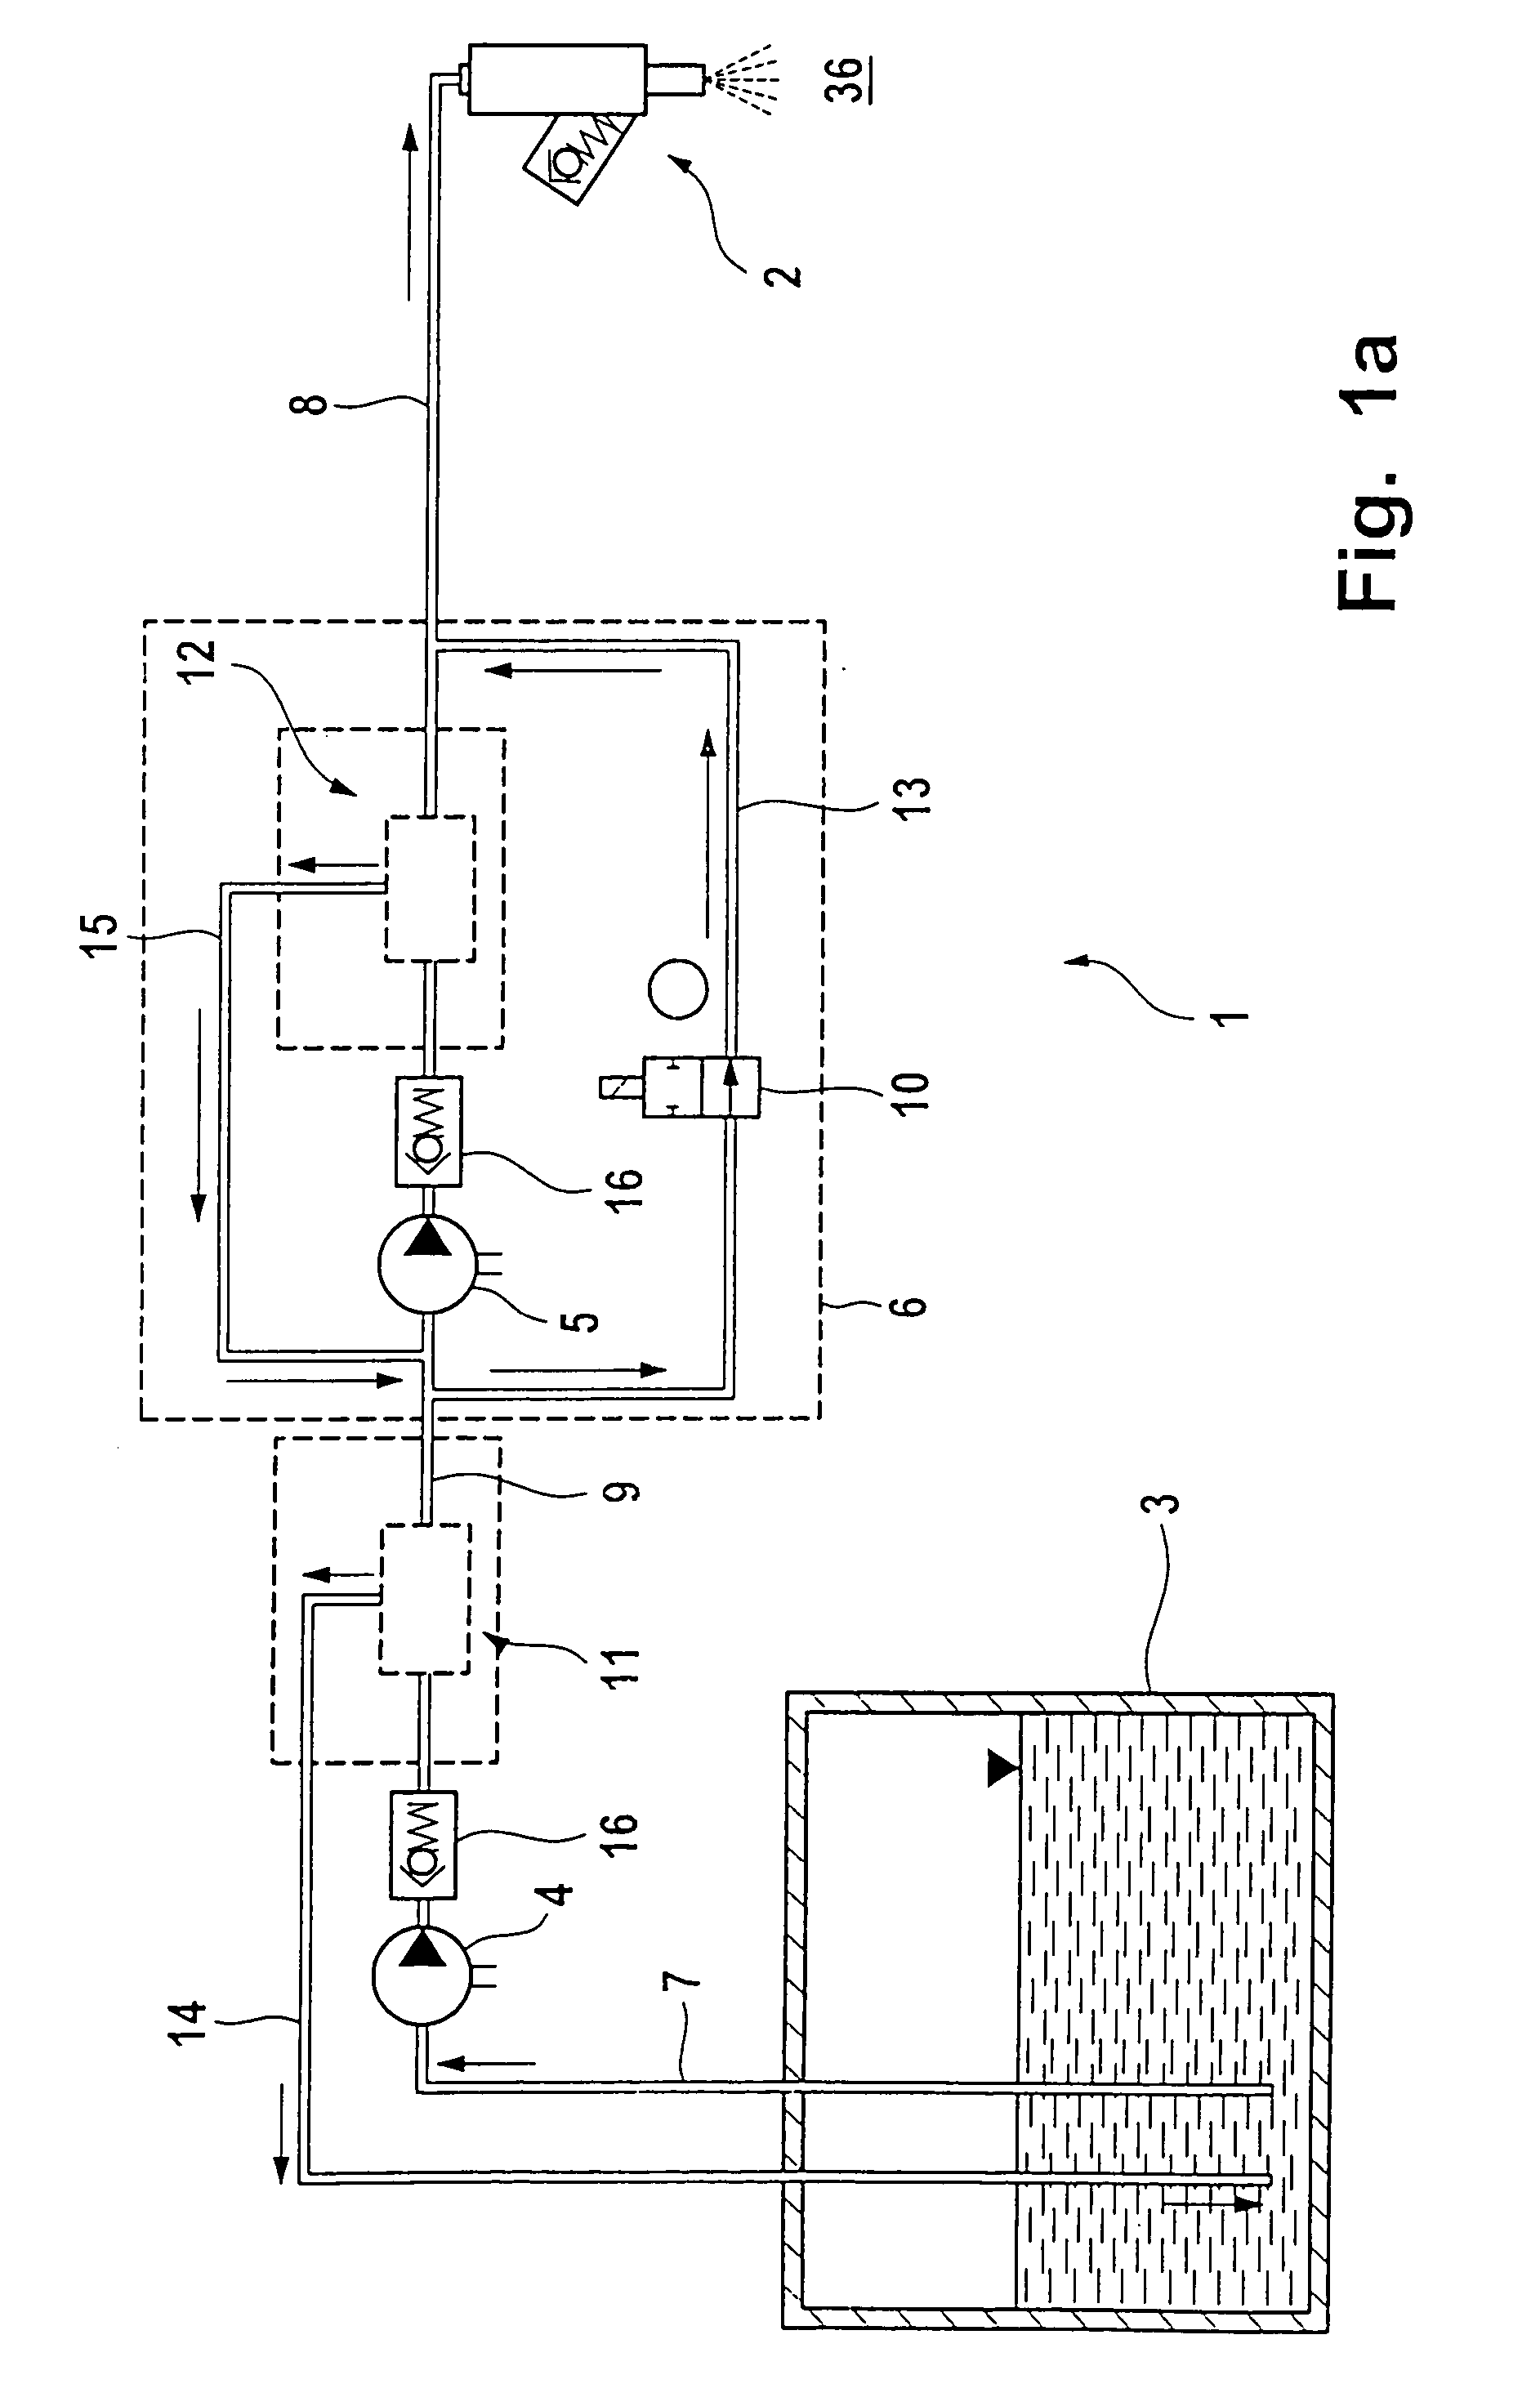 Arrangement for supplying fuel to the fuel injectors of an internal combustion engine